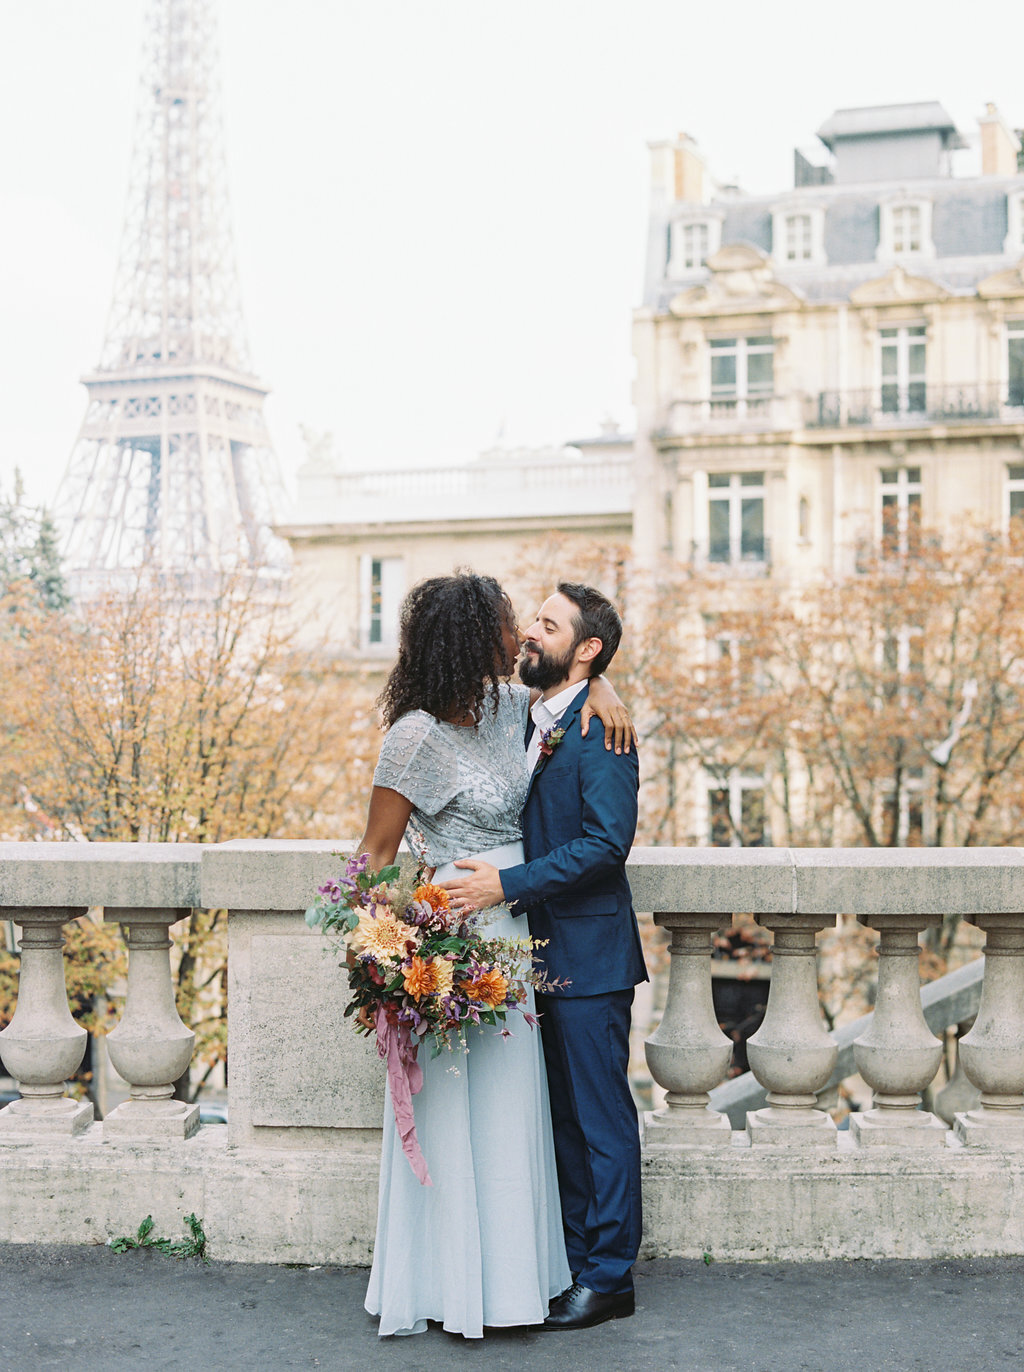 Intimate Paris Elopement--Natural, loose wedding floral design in hues of cream, burnt orange, mauve, and lavender composed of dahlias, rose, and natural greenery. Design by Rosemary and Finch.